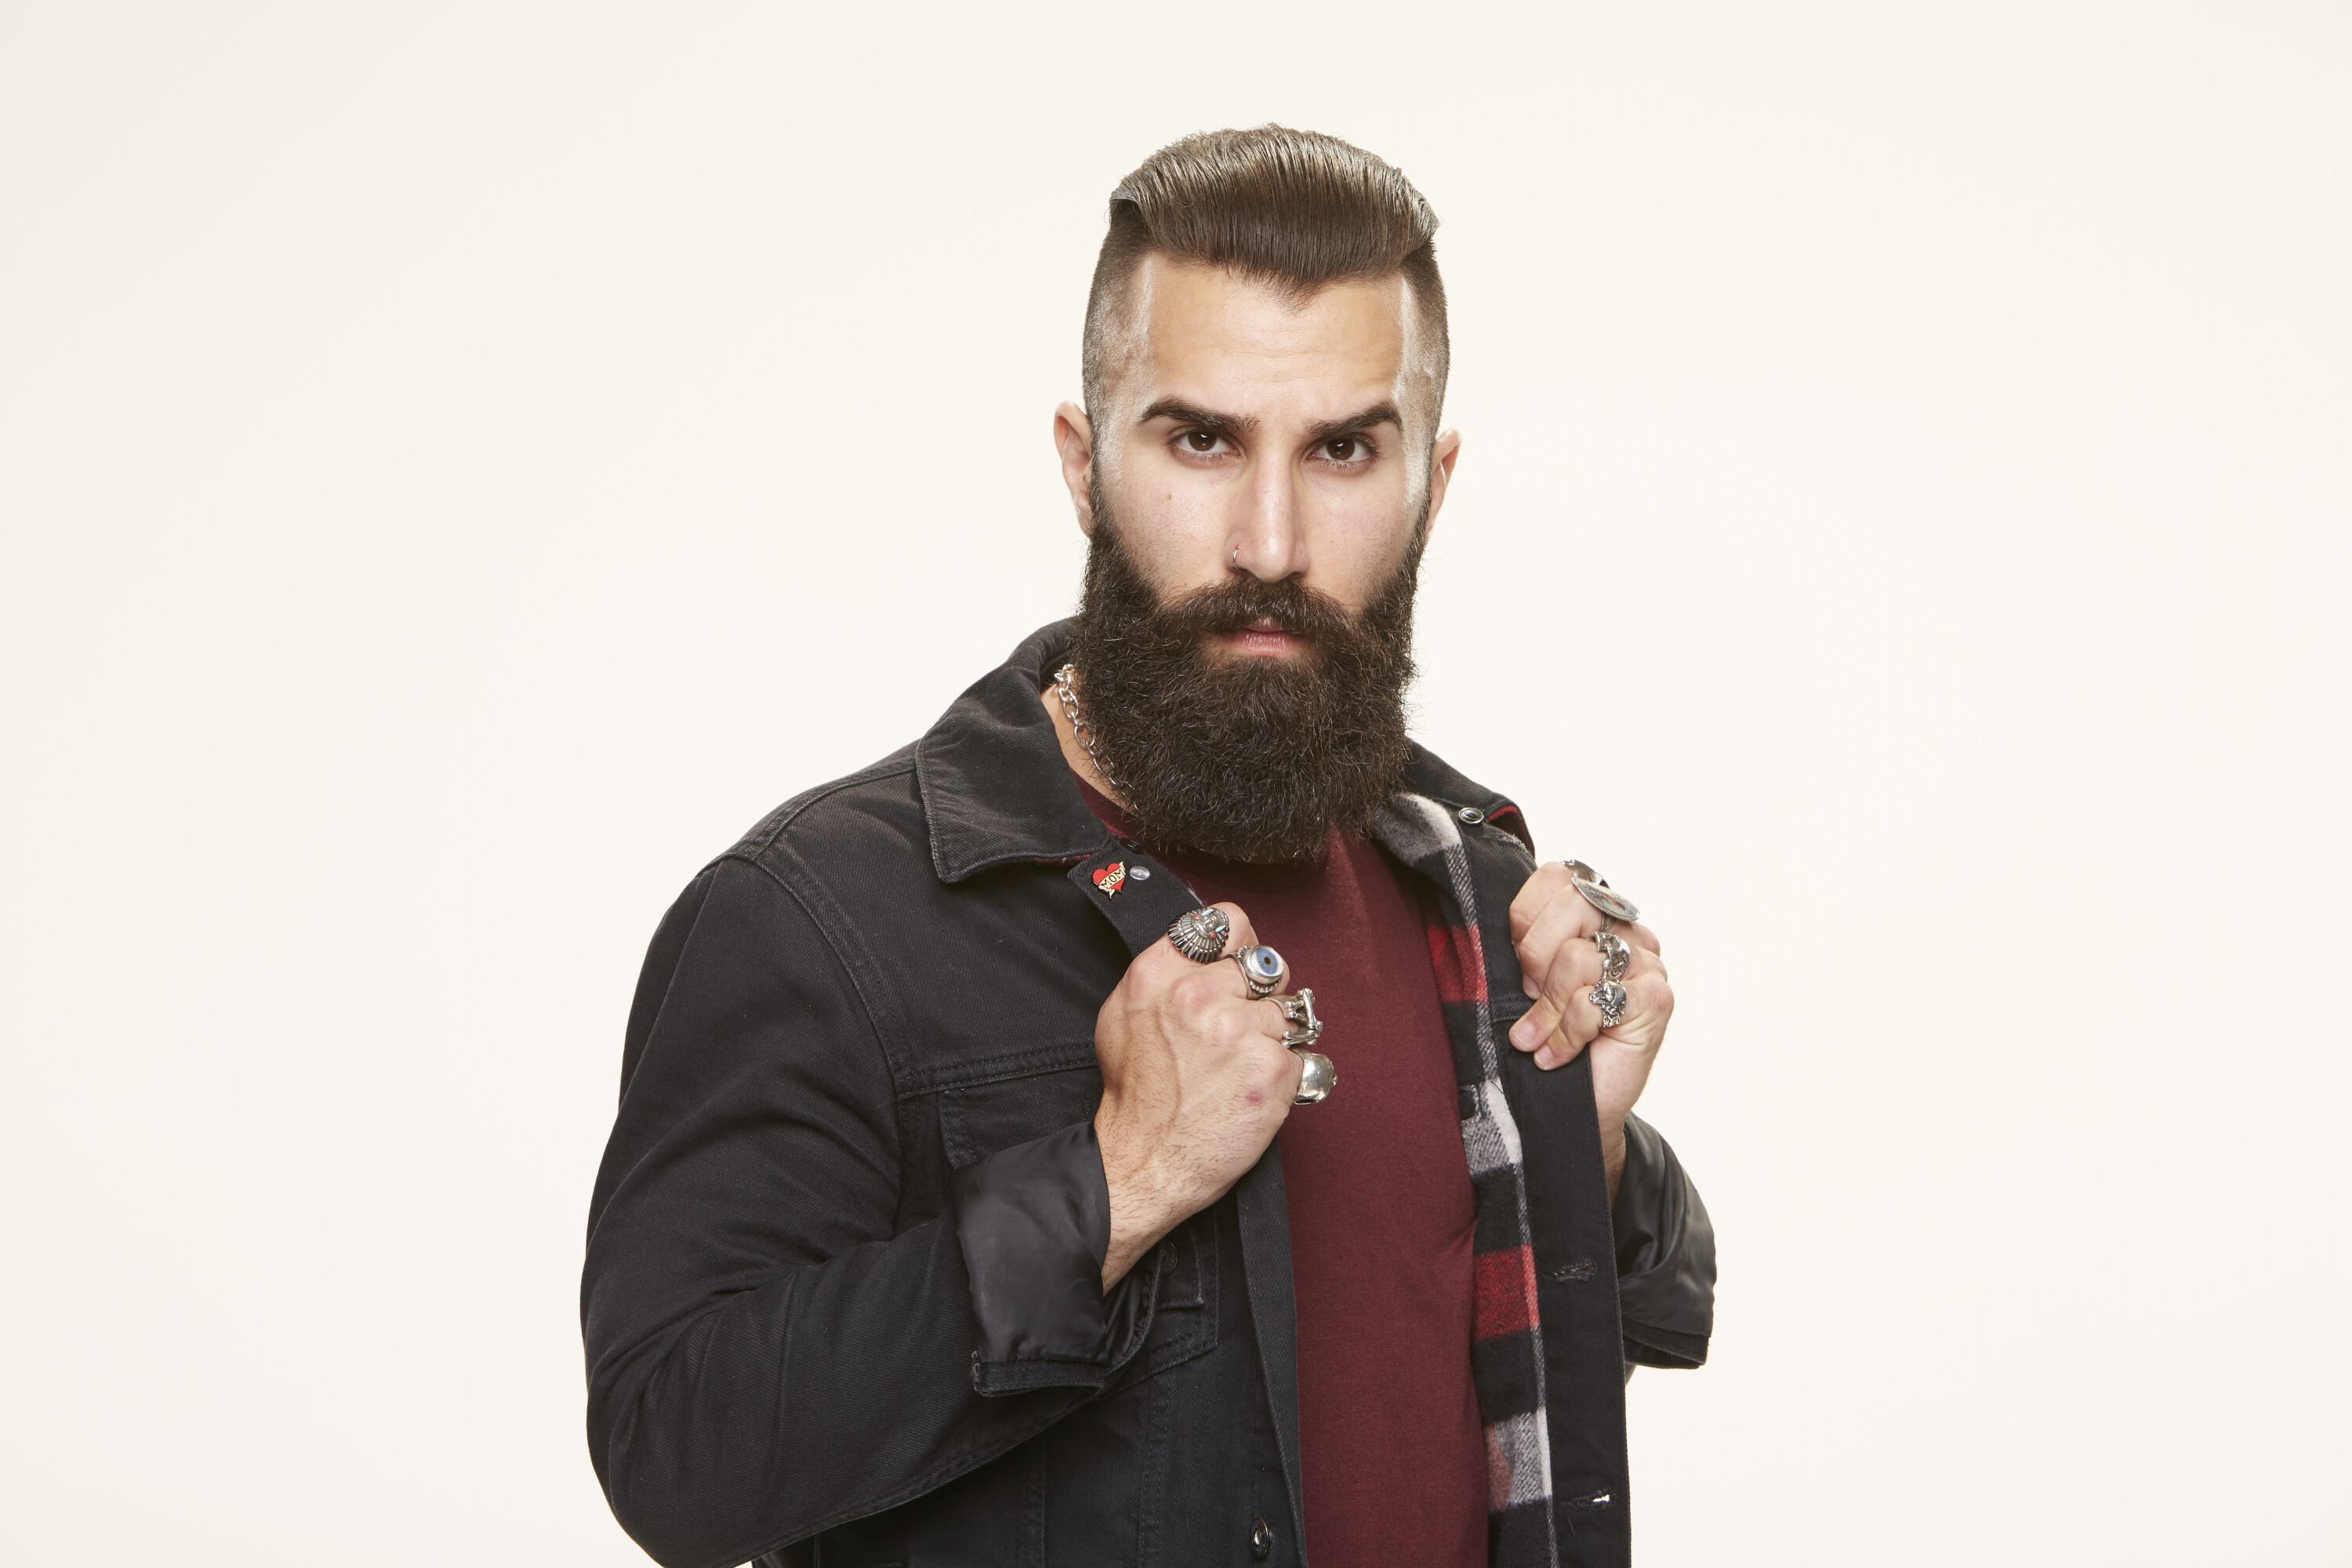 Portrait of Paul Abrahamian from 'Big Brother' Season 19, who host Julie Chen thinks deserves a do-over.